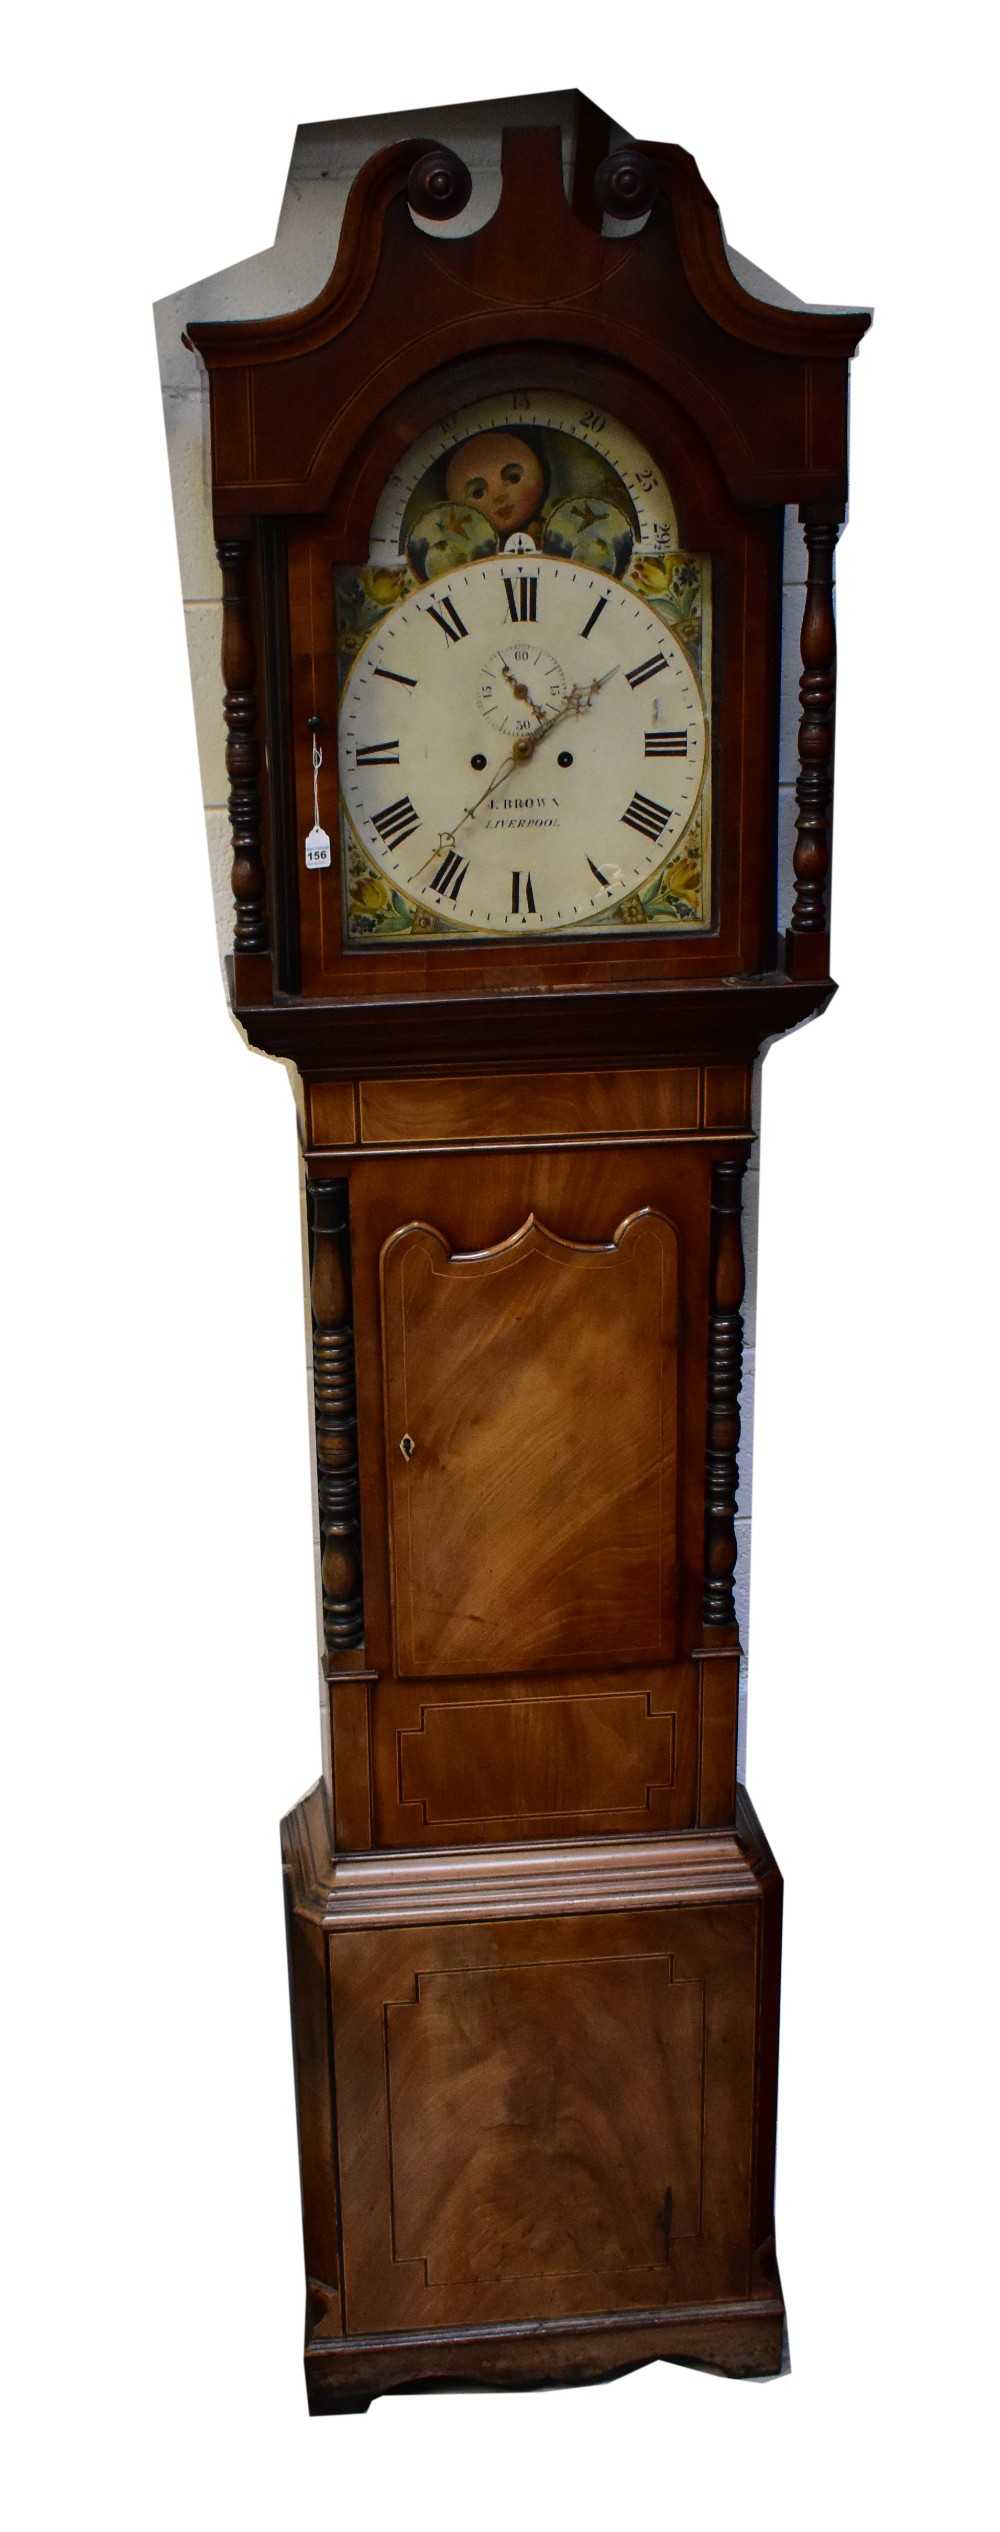 J BROWN, LIVERPOOL; a large 19th century mahogany eight day longcase clock, - Image 2 of 2